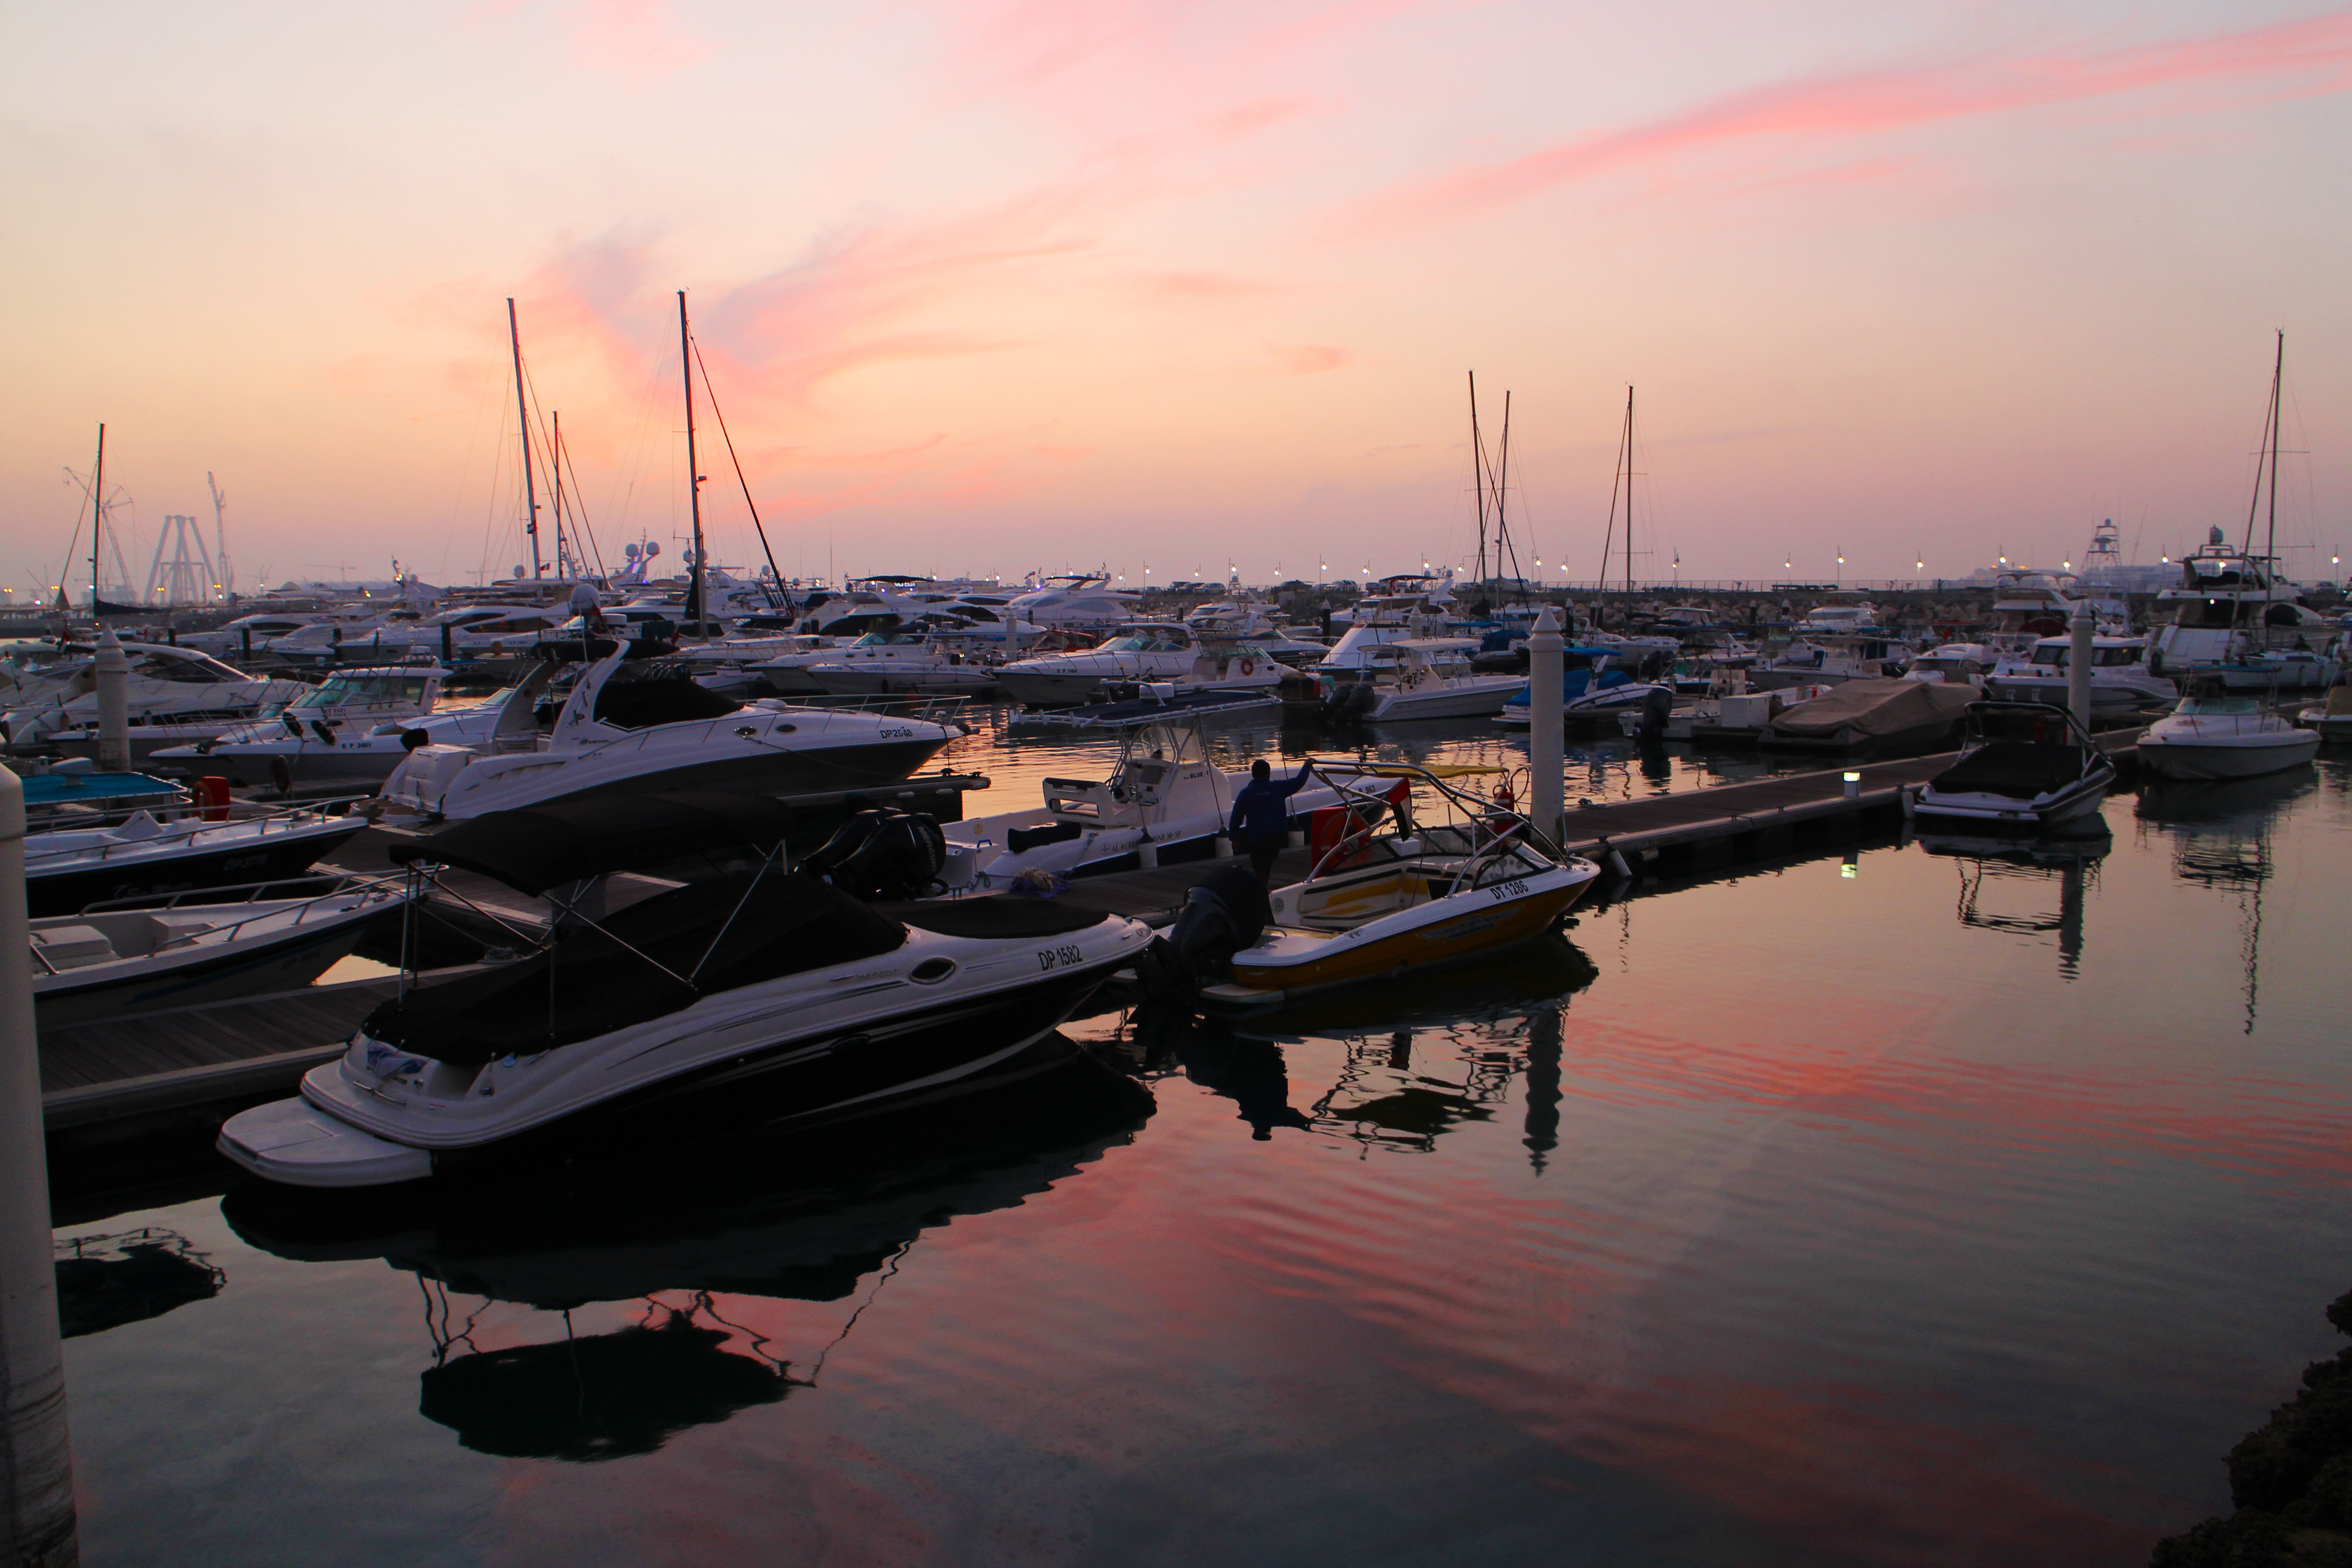 Sunset over the Marina at the end of our tour